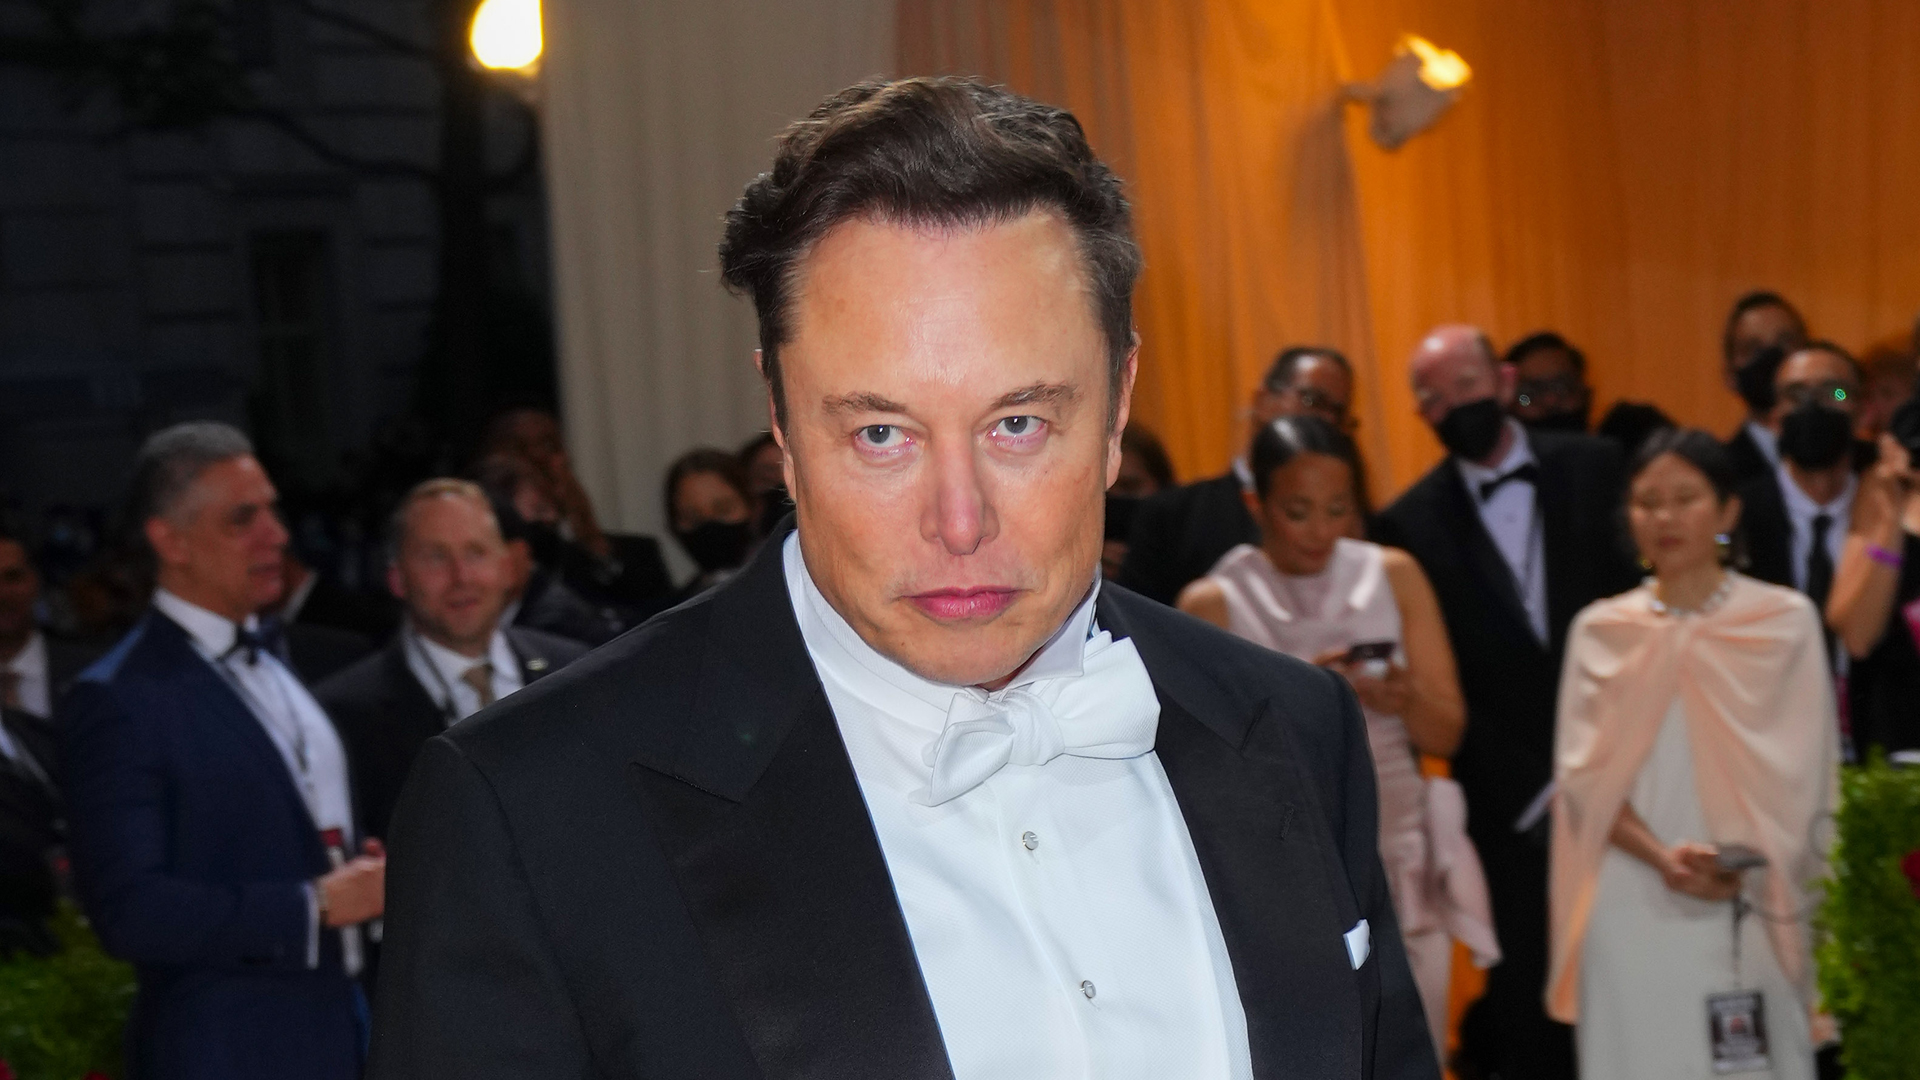 Elon Musk: Twitter deal is on hold